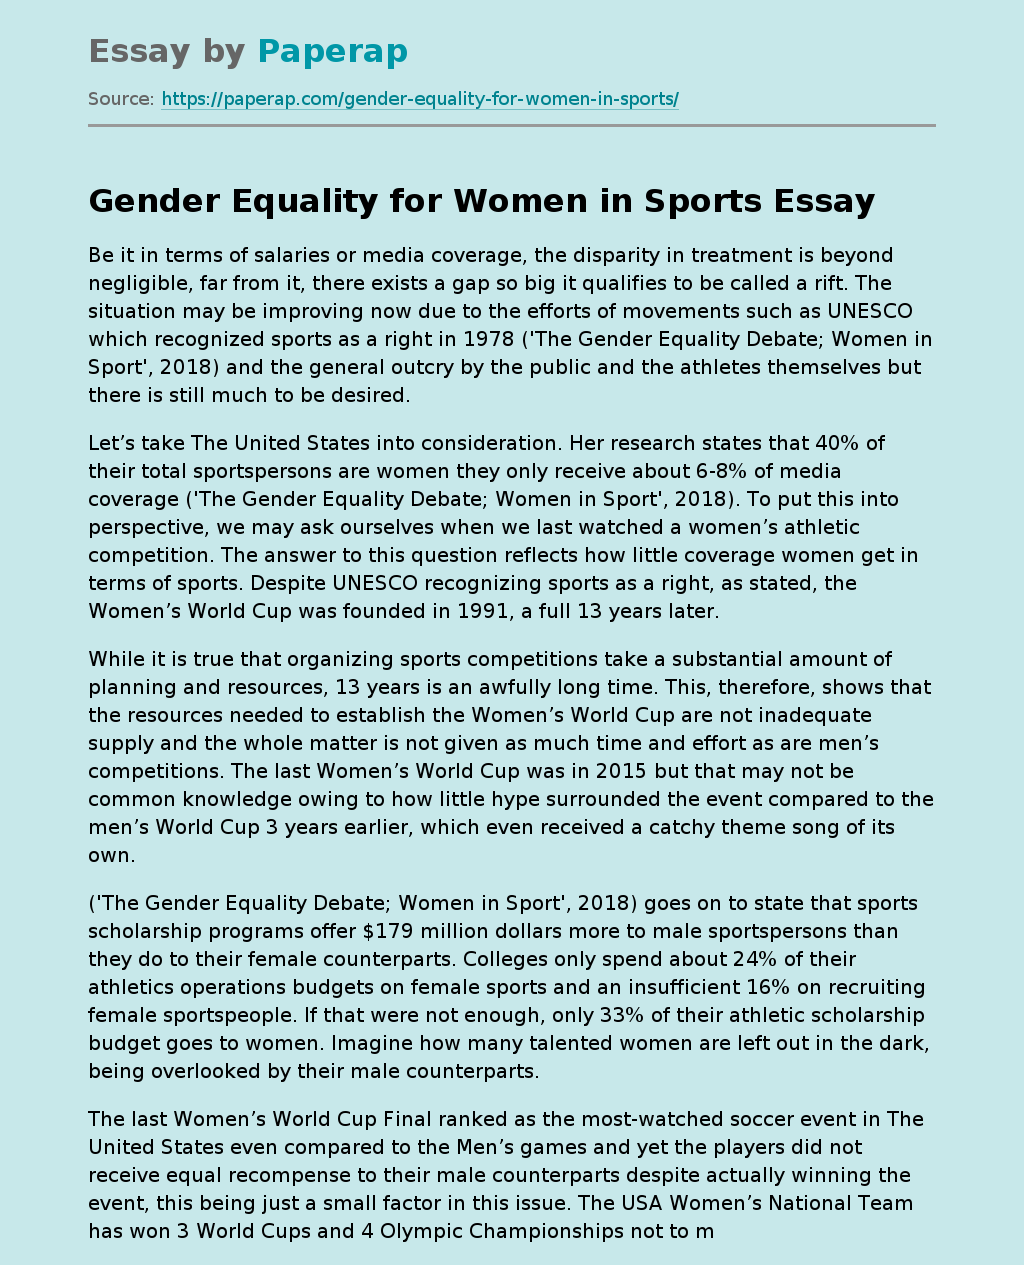 women's rights and gender equality essay